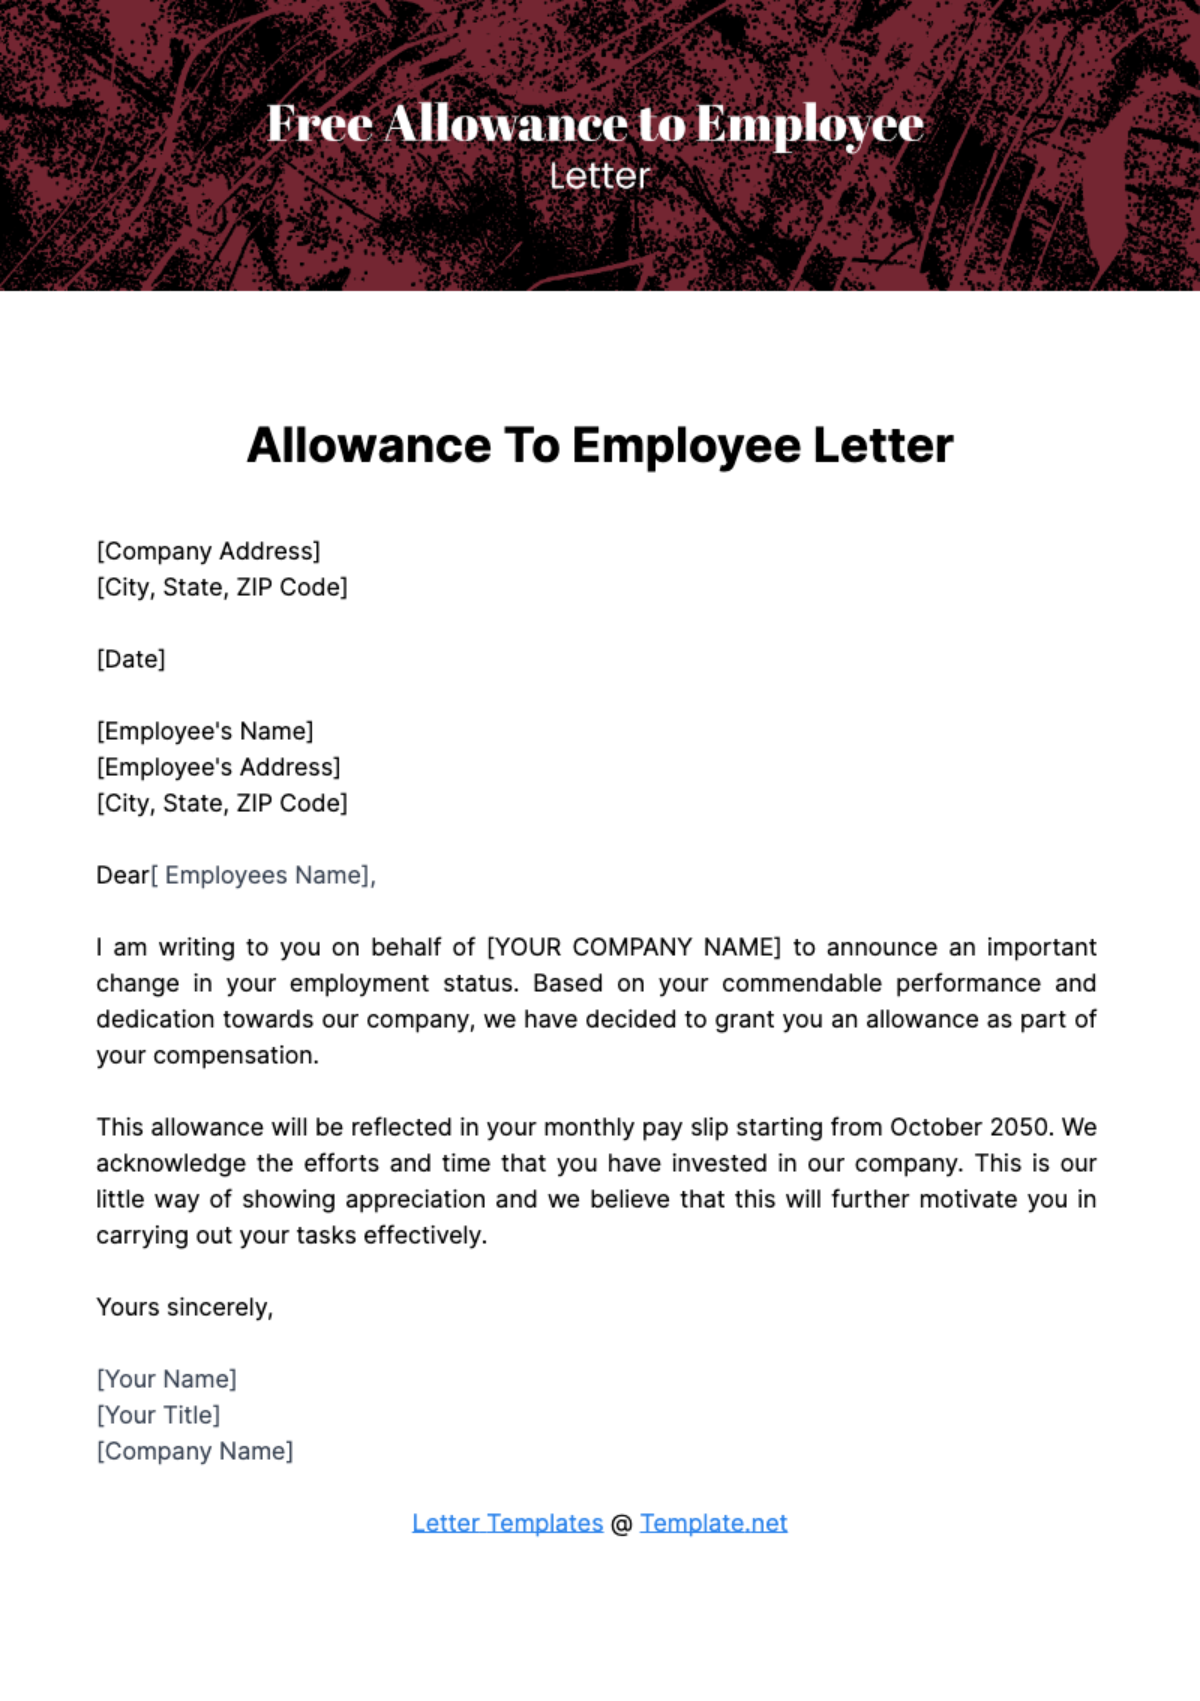 Free Allowance to Employee Letter Template